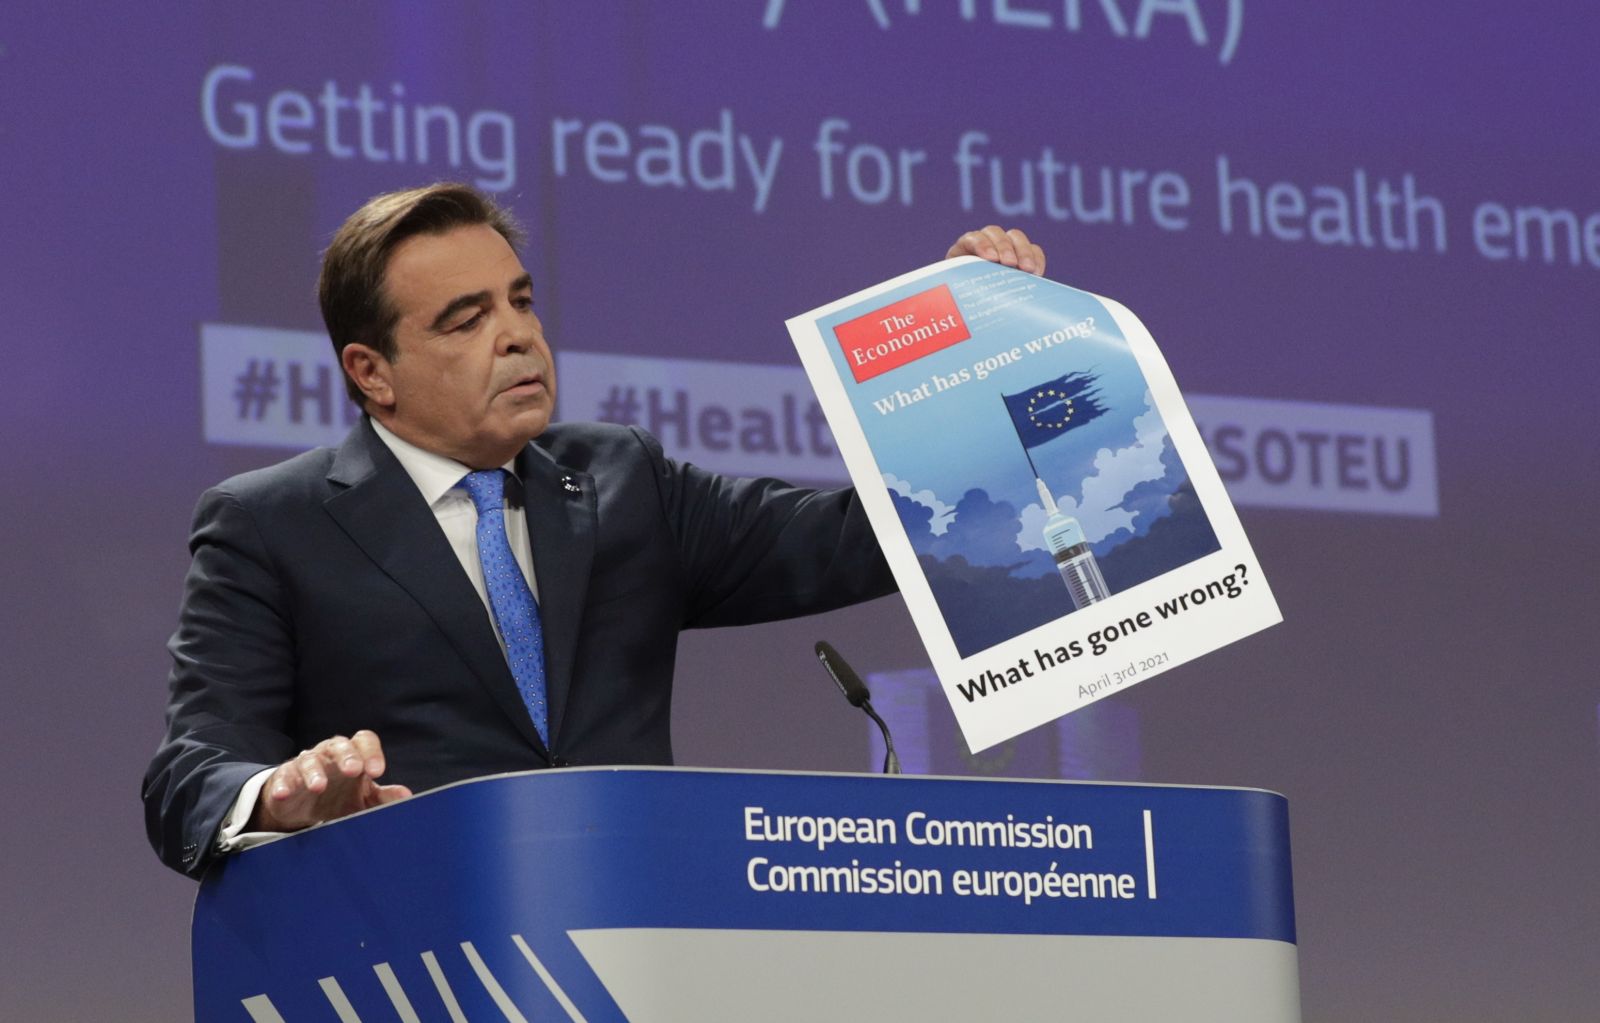 epa09471274 European Commission Vice-President for Promoting our European Way of Life, Margaritis Schinas (L) shows the front page of an issue of The Economist asking the EU 'What has gone wrong' next to European Health Commissioner Stella Kyriakides (R) during a press conference to present the European Health Emergency Preparedness and Response Authority (HERA) in Brussels, Belgium, 16 September 2021.  EPA/OLIVIER HOSLET